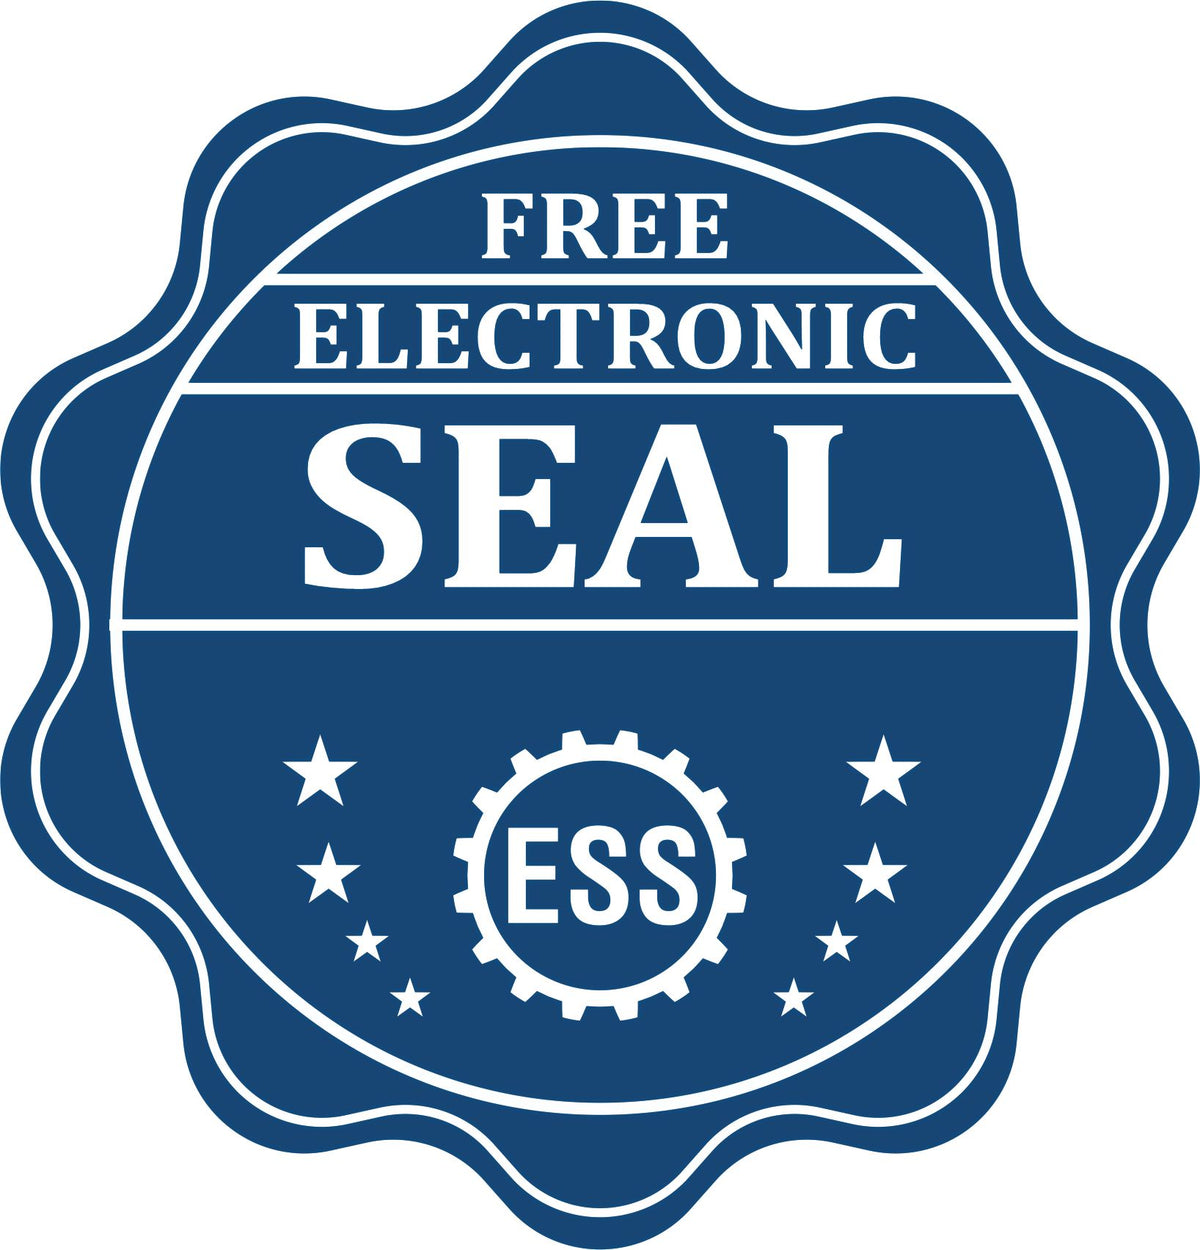 A badge showing a free electronic seal for the Hybrid California Engineer Seal with stars and the ESS gear on the emblem.